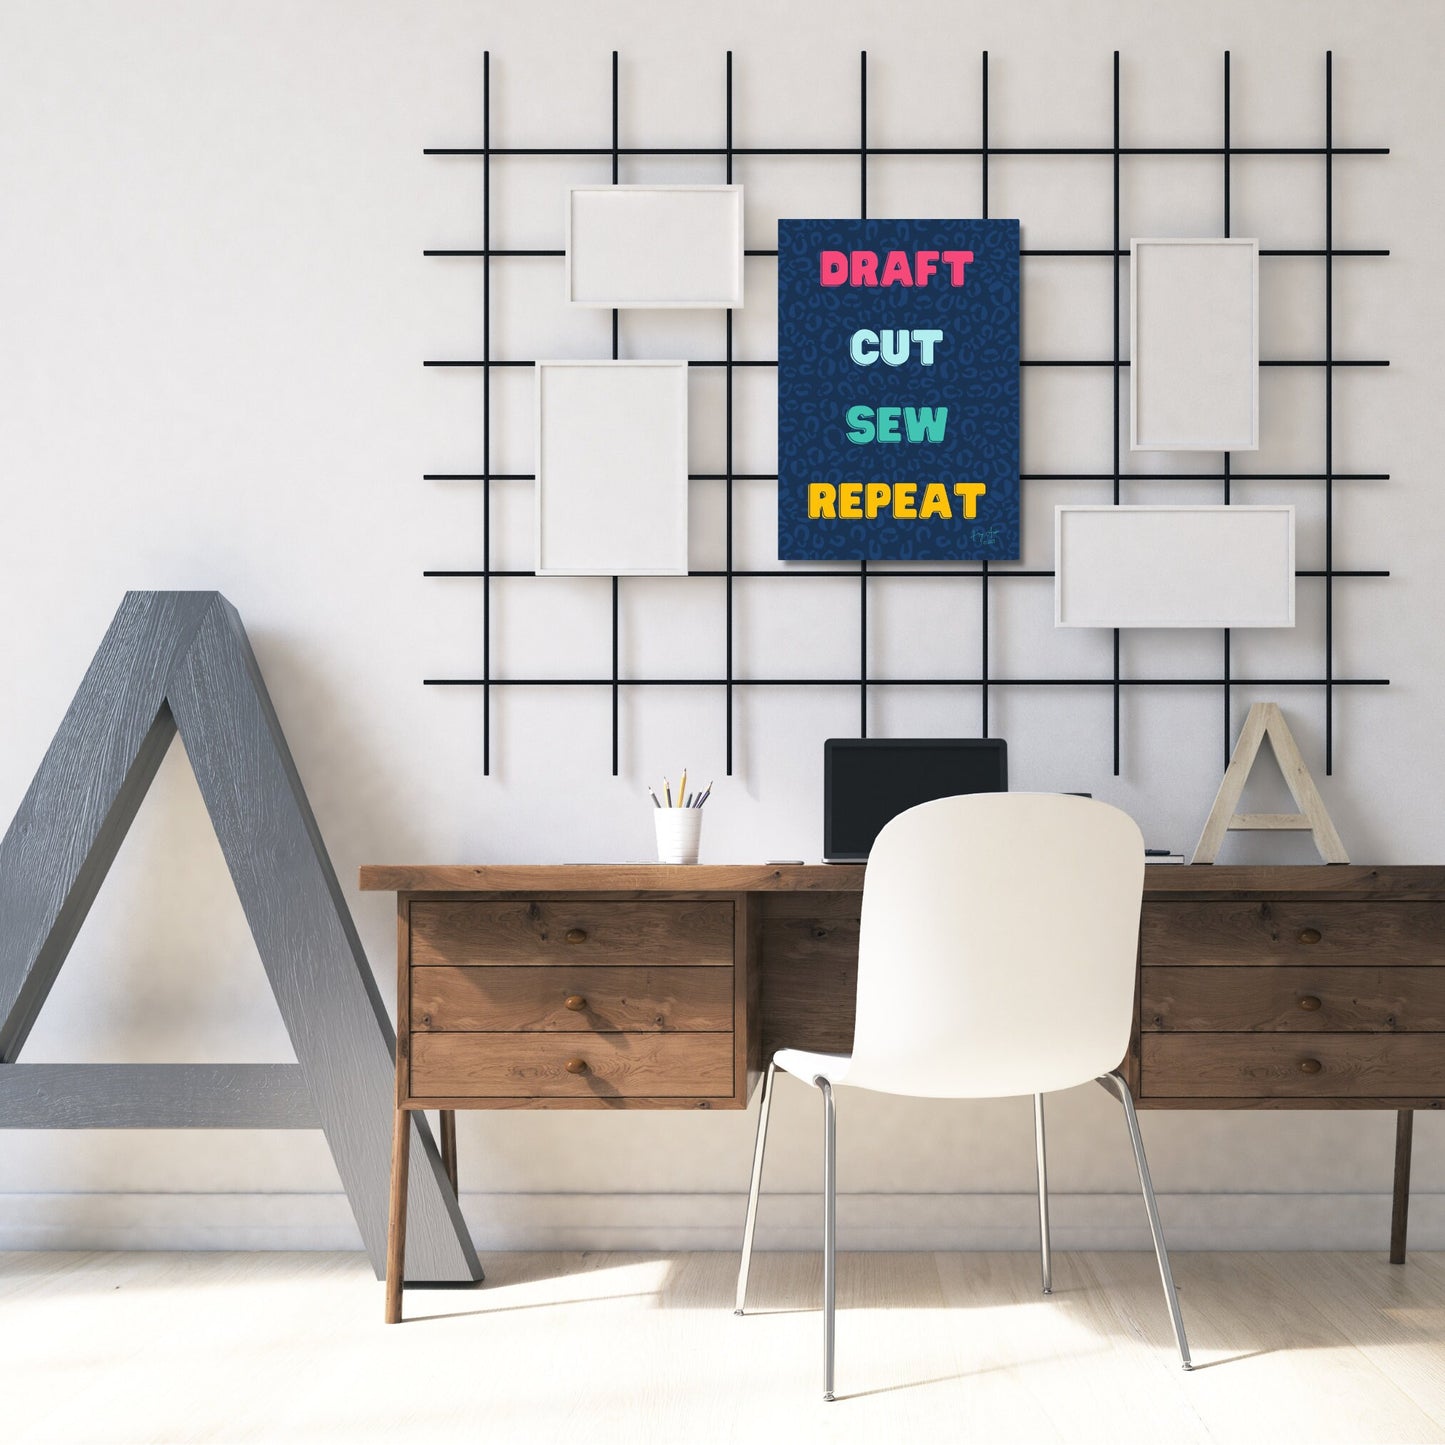 Draft Cut Sew Repeat | Digital Wall Art | Download Only | A3, A4, A5, A6 Sizes